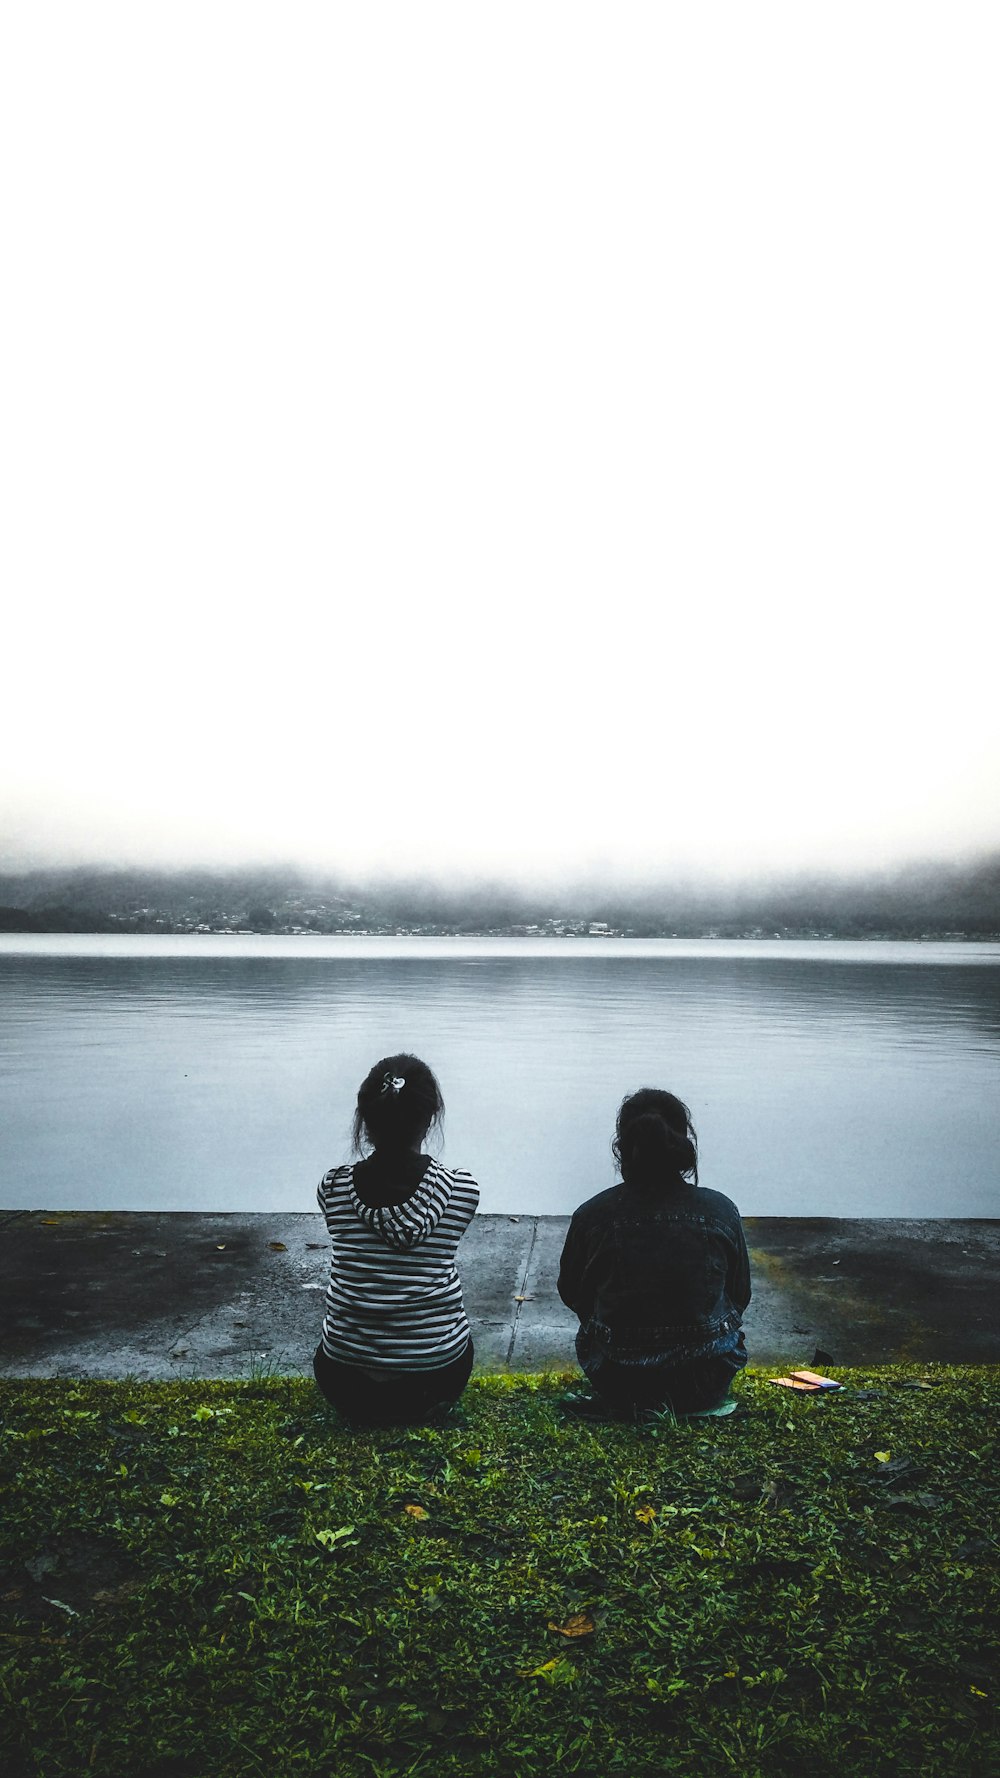 two people sitting on the grass looking out at the water